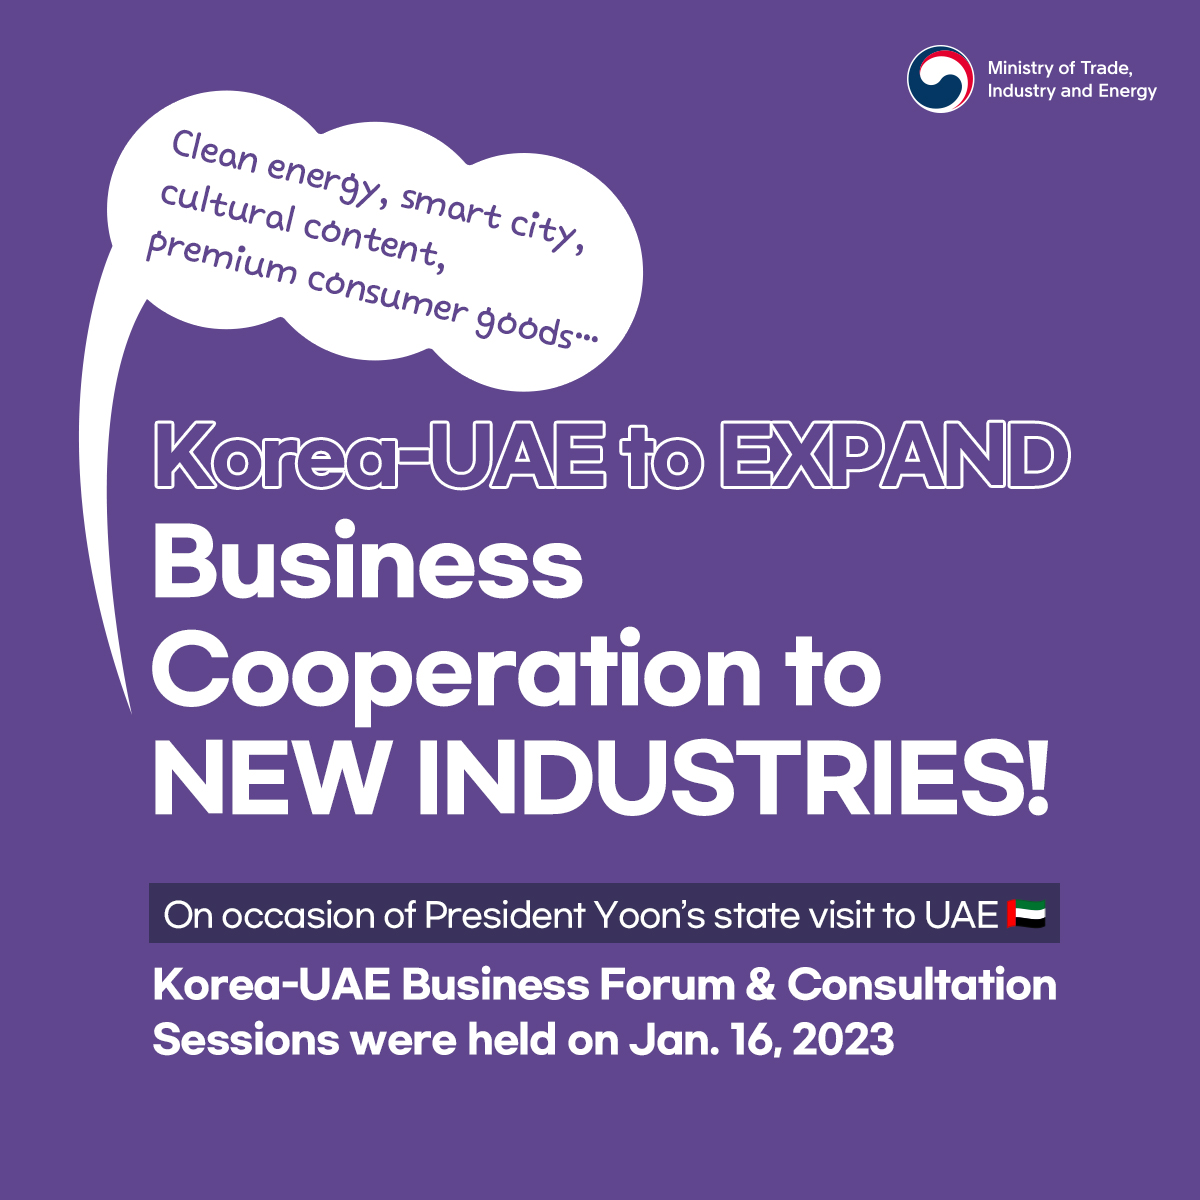 Korea and UAE expand business cooperation to new industries! Image 0